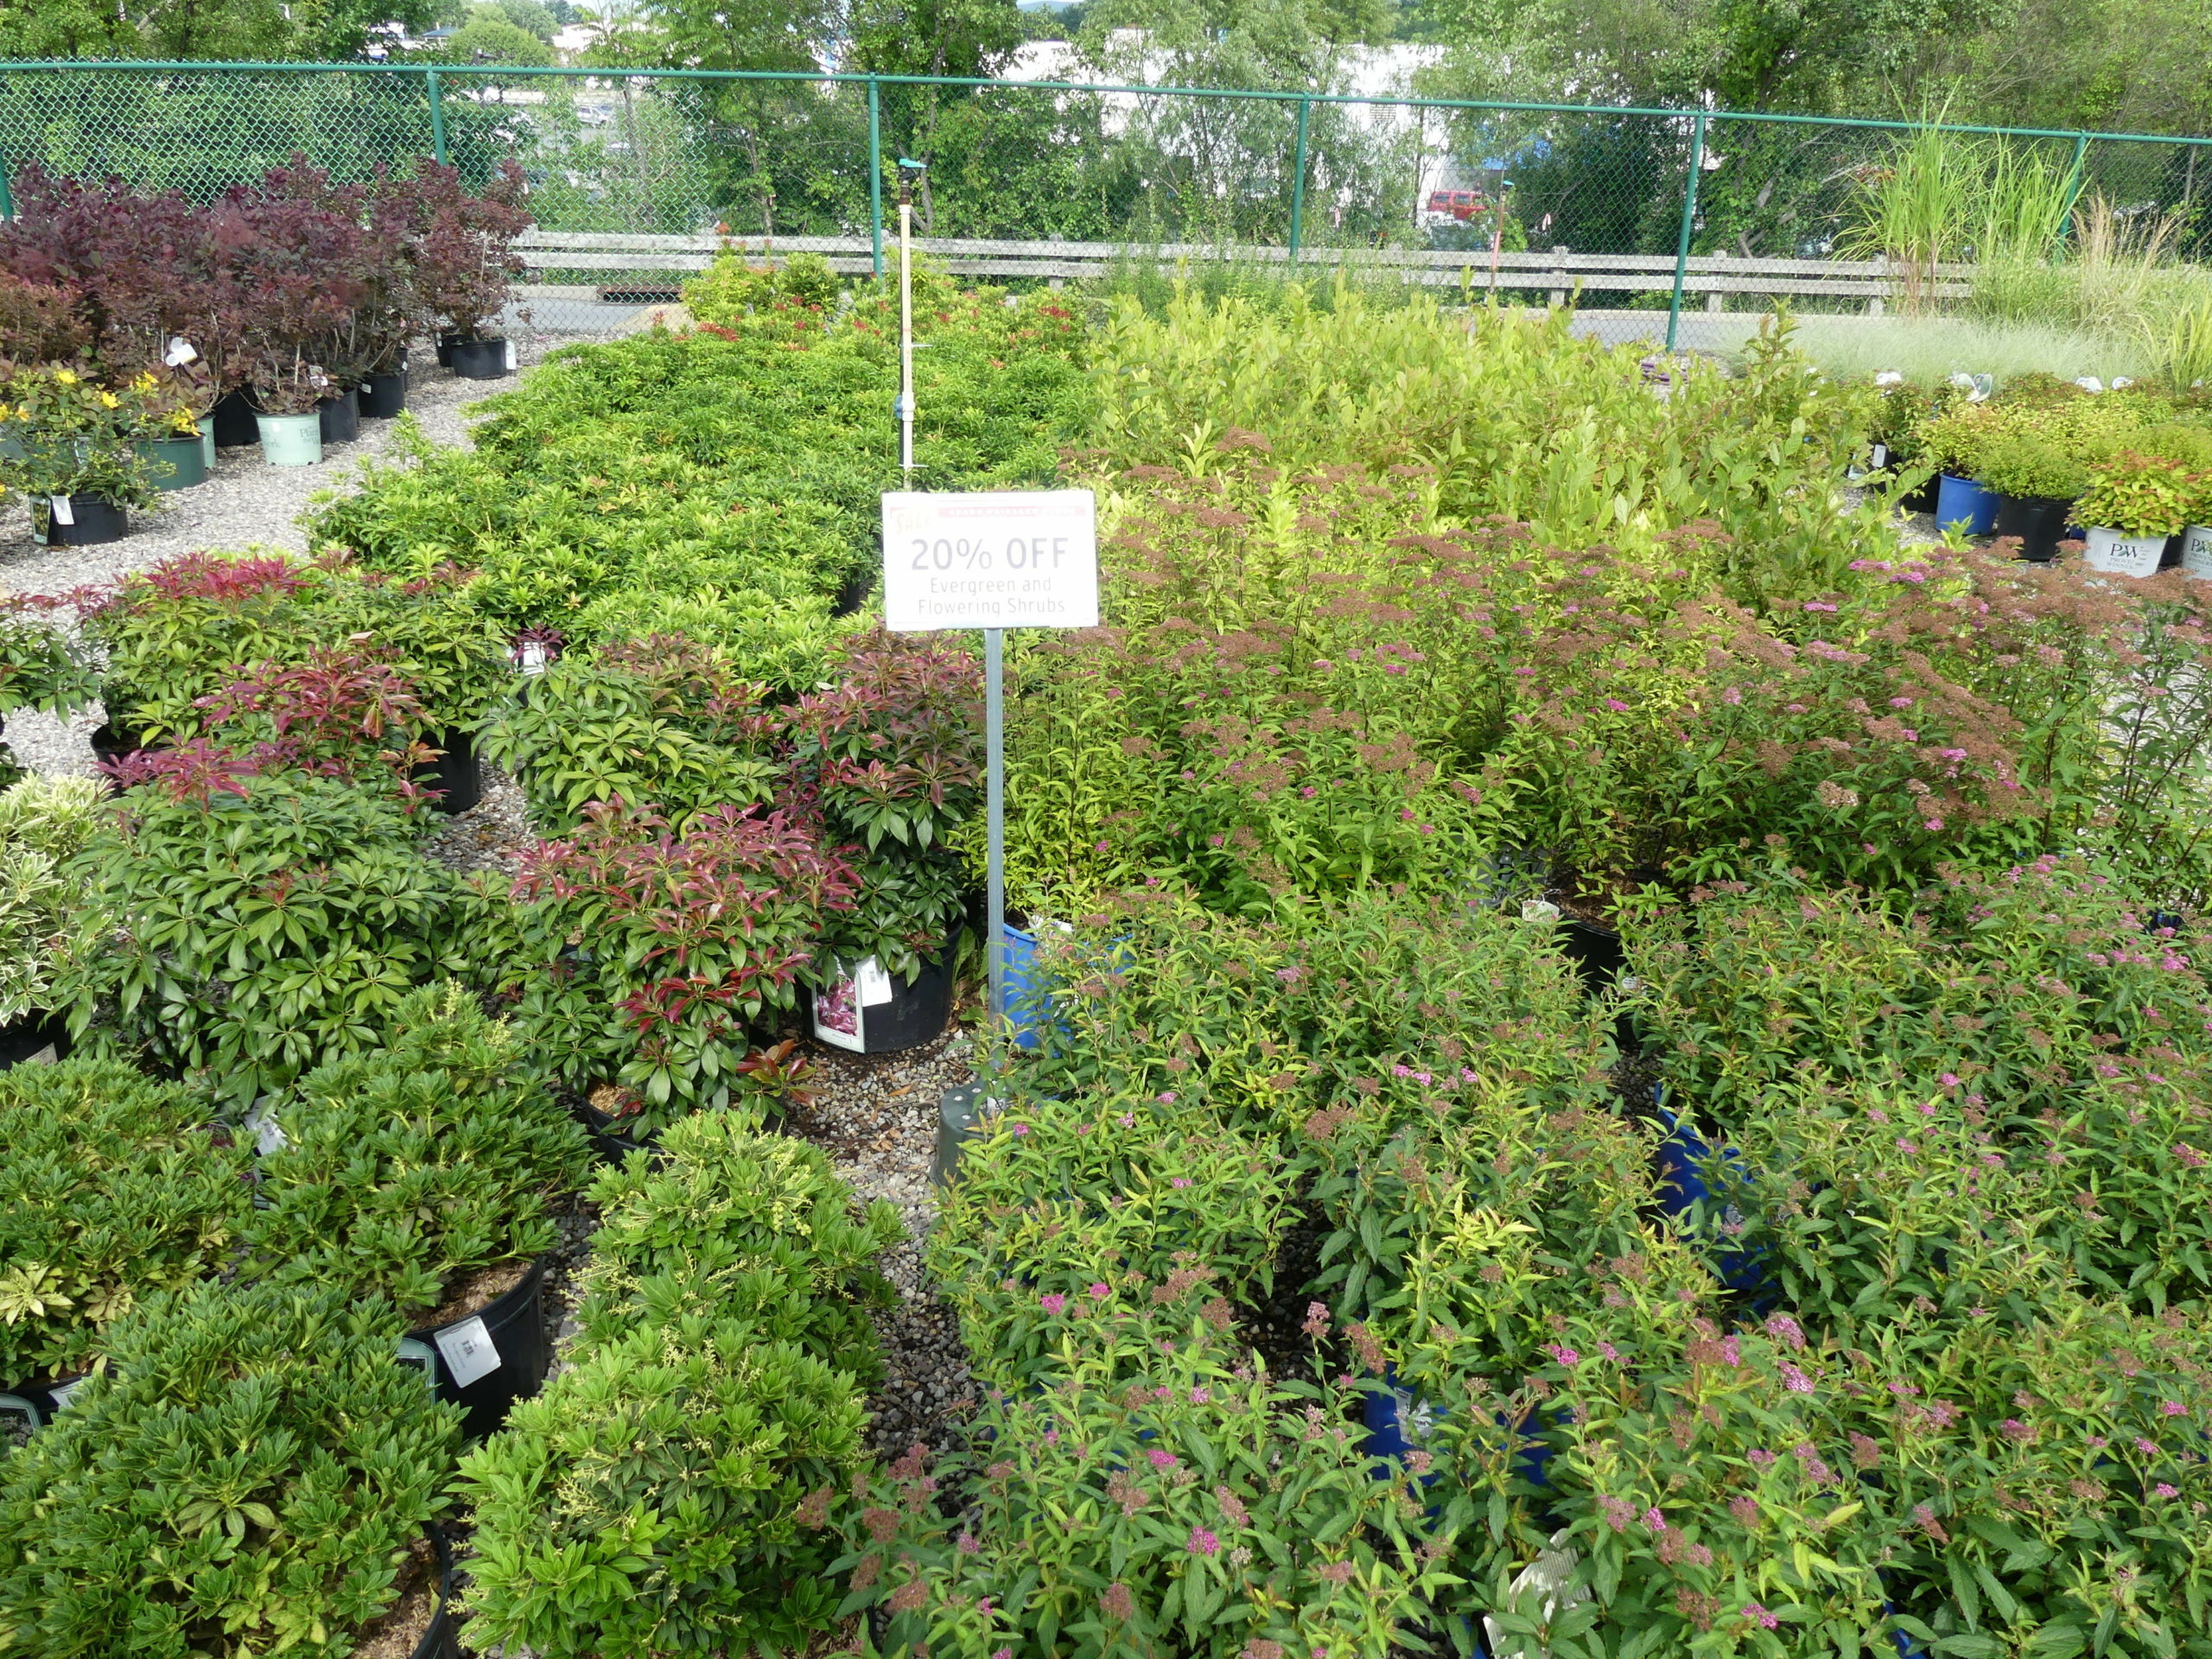 Containerized shrubs at 20 percent off in mid-July.  These great-looking plants can go into a holding area for planting in the spring or they can go directly into the landscape.  Check the root area once the plants are de-potted and loosen the roots before planting.